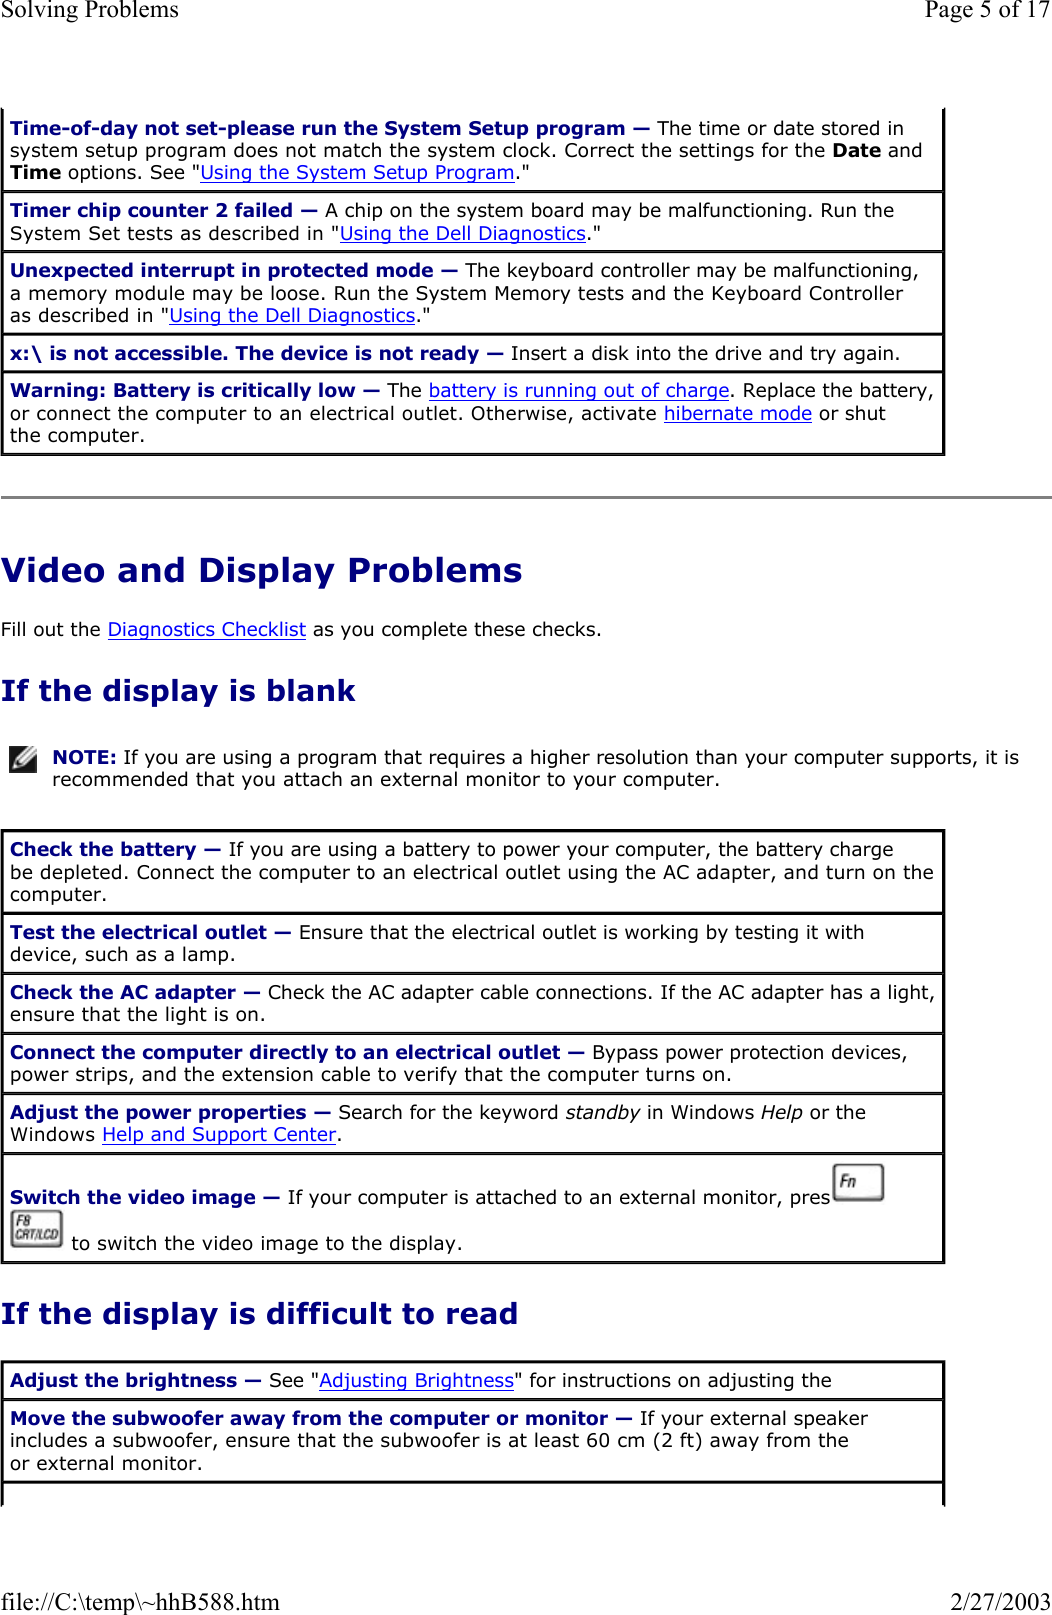 Video and Display Problems Fill out the Diagnostics Checklist as you complete these checks. If the display is blank If the display is difficult to read Time-of-day not set-please run the System Setup program — The time or date stored in system setup program does not match the system clock. Correct the settings for the Date and Time options. See &quot;Using the System Setup Program.&quot; Timer chip counter 2 failed — A chip on the system board may be malfunctioning. Run the System Set tests as described in &quot;Using the Dell Diagnostics.&quot; Unexpected interrupt in protected mode — The keyboard controller may be malfunctioning, a memory module may be loose. Run the System Memory tests and the Keyboard Controller as described in &quot;Using the Dell Diagnostics.&quot; x:\ is not accessible. The device is not ready — Insert a disk into the drive and try again. Warning: Battery is critically low — The battery is running out of charge. Replace the battery, or connect the computer to an electrical outlet. Otherwise, activate hibernate mode or shut the computer. NOTE: If you are using a program that requires a higher resolution than your computer supports, it is recommended that you attach an external monitor to your computer.Check the battery — If you are using a battery to power your computer, the battery charge be depleted. Connect the computer to an electrical outlet using the AC adapter, and turn on the computer. Test the electrical outlet — Ensure that the electrical outlet is working by testing it with device, such as a lamp. Check the AC adapter — Check the AC adapter cable connections. If the AC adapter has a light, ensure that the light is on. Connect the computer directly to an electrical outlet — Bypass power protection devices, power strips, and the extension cable to verify that the computer turns on.  Adjust the power properties — Search for the keyword standby in Windows Help or the Windows Help and Support Center.  Switch the video image — If your computer is attached to an external monitor, press    to switch the video image to the display. Adjust the brightness — See &quot;Adjusting Brightness&quot; for instructions on adjusting the Move the subwoofer away from the computer or monitor — If your external speaker includes a subwoofer, ensure that the subwoofer is at least 60 cm (2 ft) away from the or external monitor. Page 5 of 17Solving Problems2/27/2003file://C:\temp\~hhB588.htm